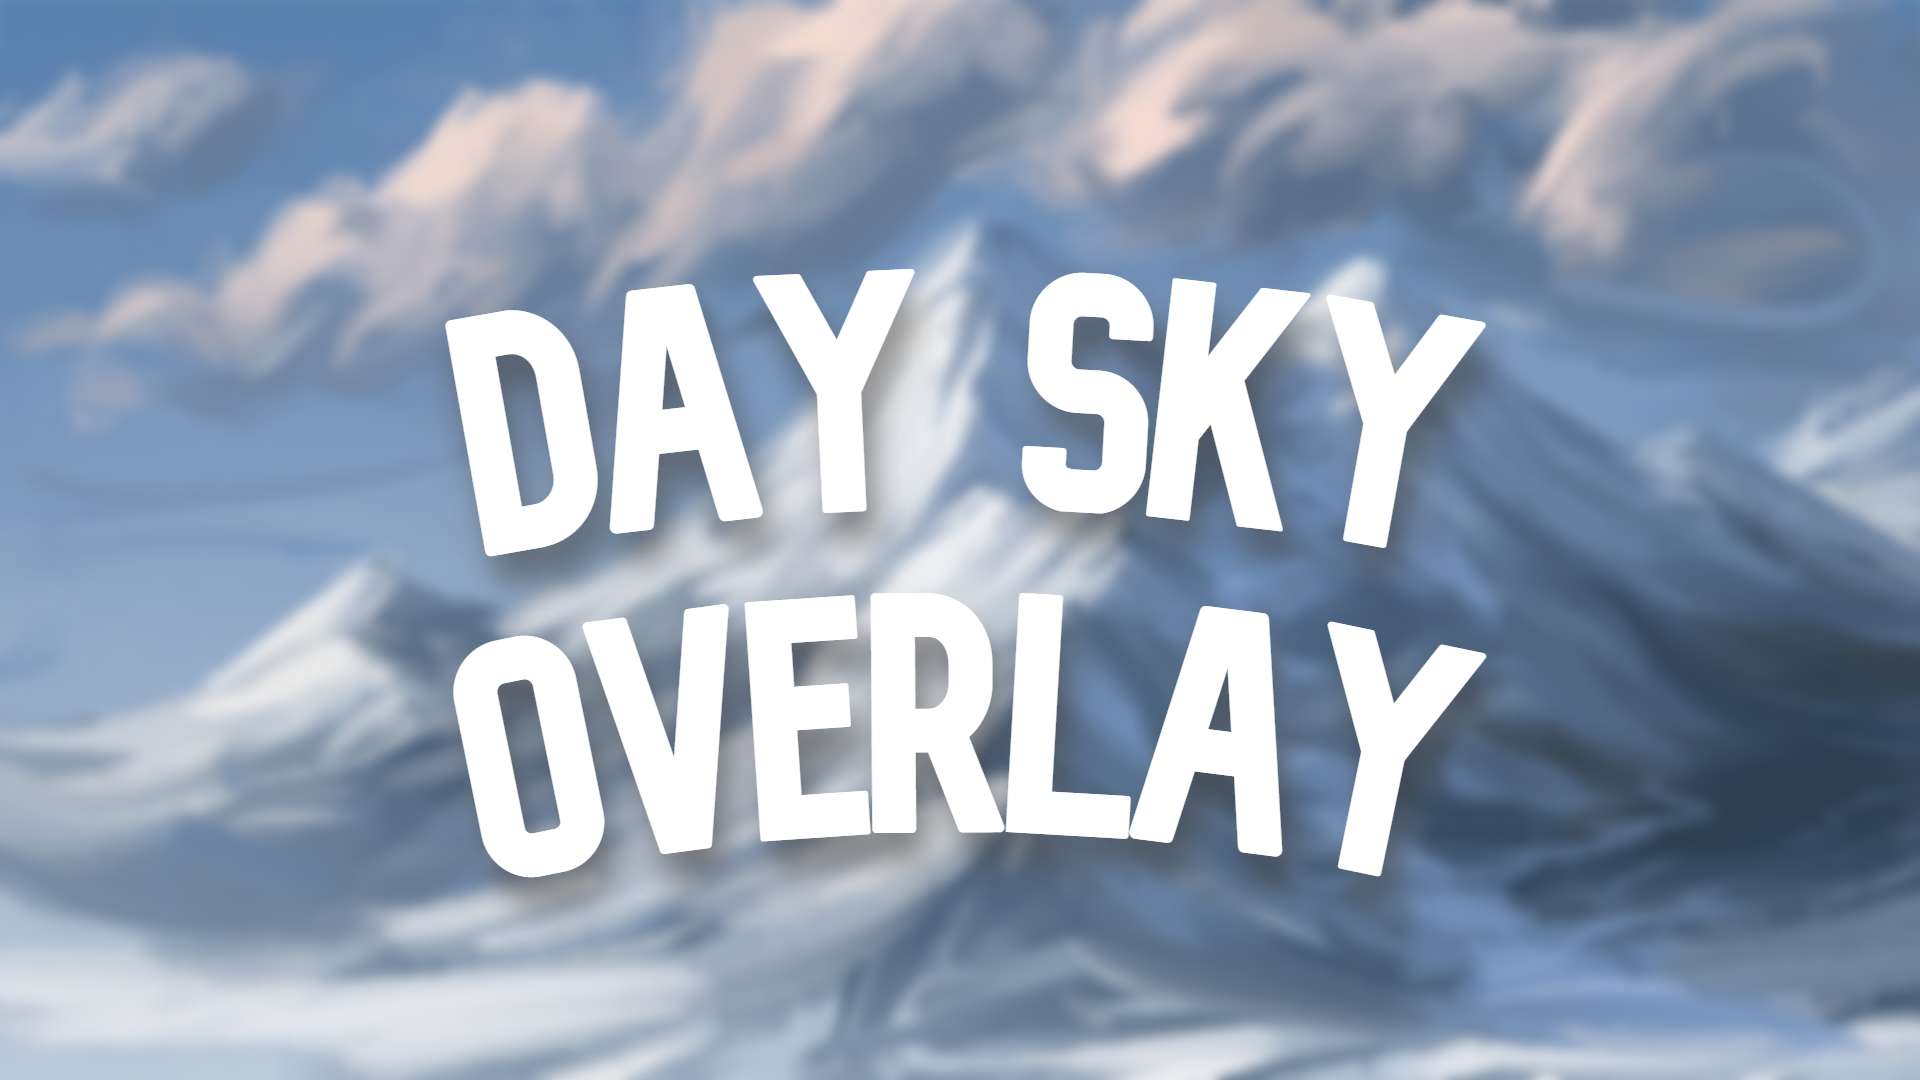 Day Sky Overlay #7 16x by Rh56 on PvPRP